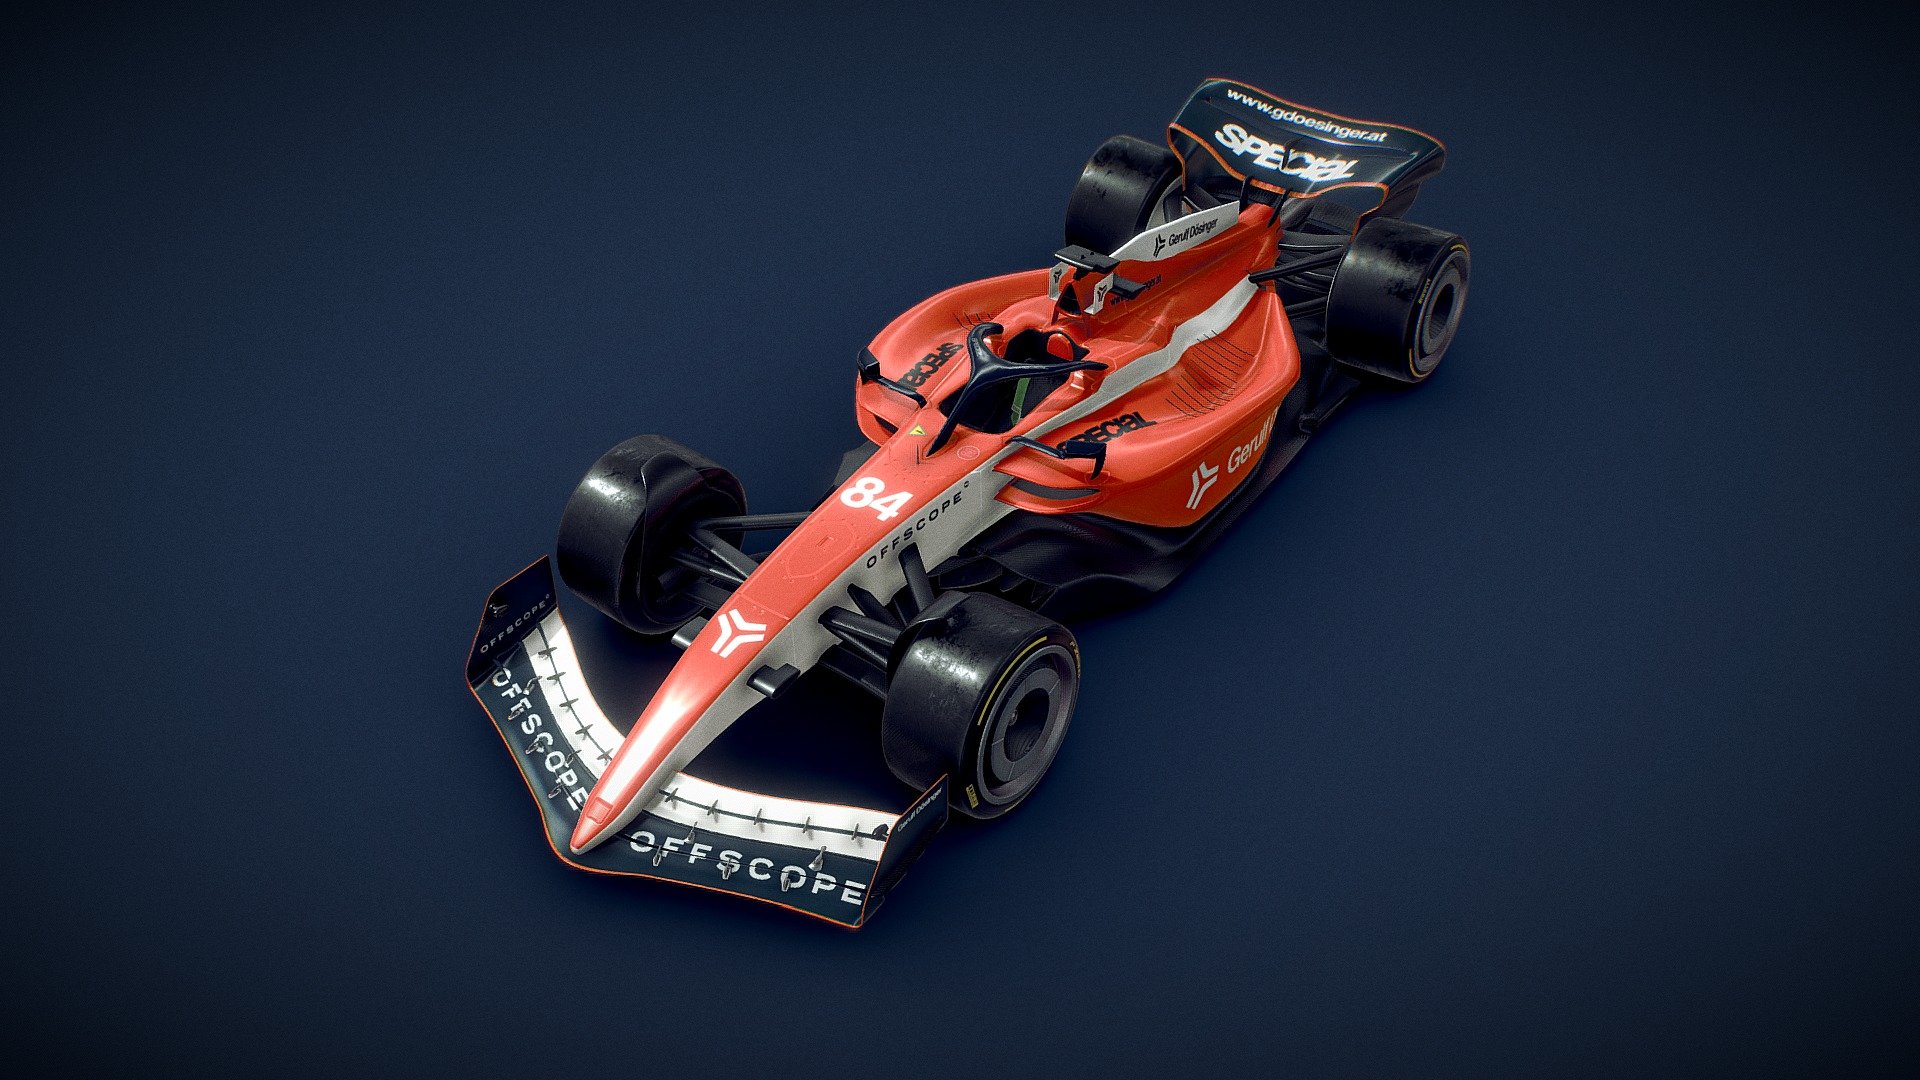 Based and updated to the latest aesthetic Formula 1 Standard..

Poly-count is mid- to high-count in order to bring the model to highest fidelity. The wheels have pivots that make them immediately rotateable. Chassis can be delivered as subdivideable. The sketchfab-viewer shows a SubDiv level of 2.

This model is fully UV unwrapped.
Delivery includes the original blender file as well as an fbx for maximum compatibility.

Make sure to download the &ldquo;Additional File